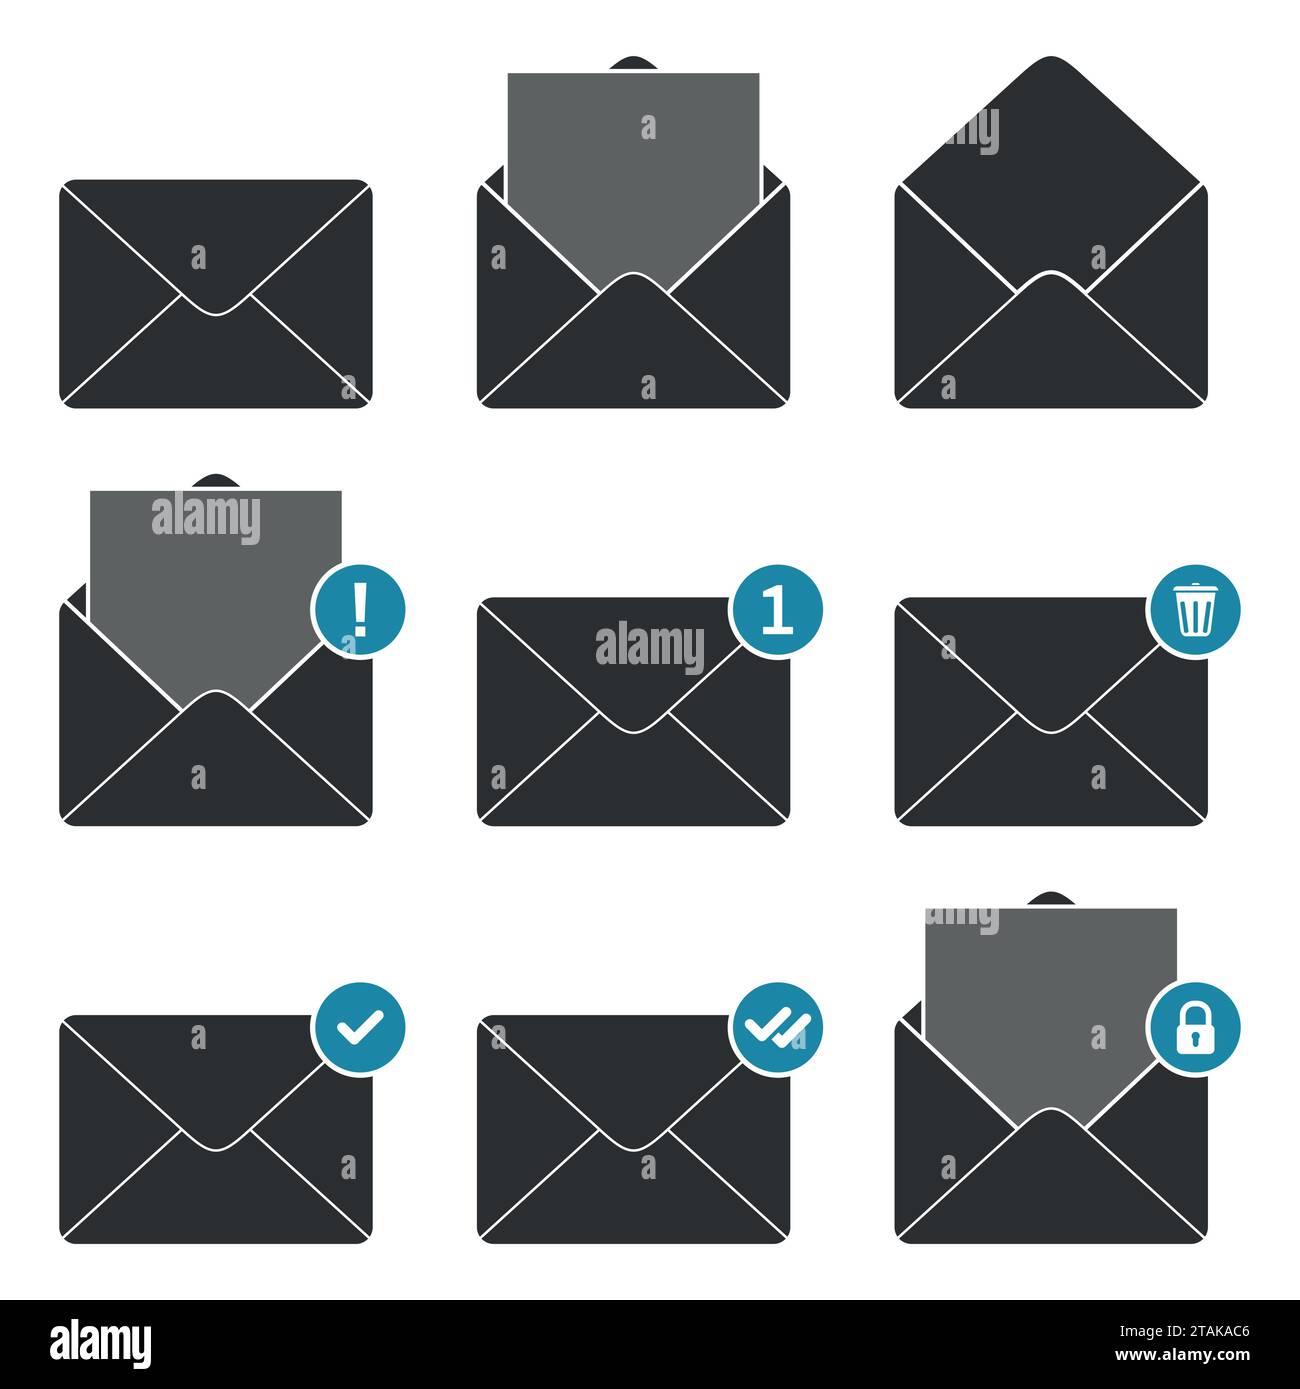 Mail envelope notifications icons set. Concept of incoming email messages, communication, mail delivery service for social network, web or mobile app. Stock Vector